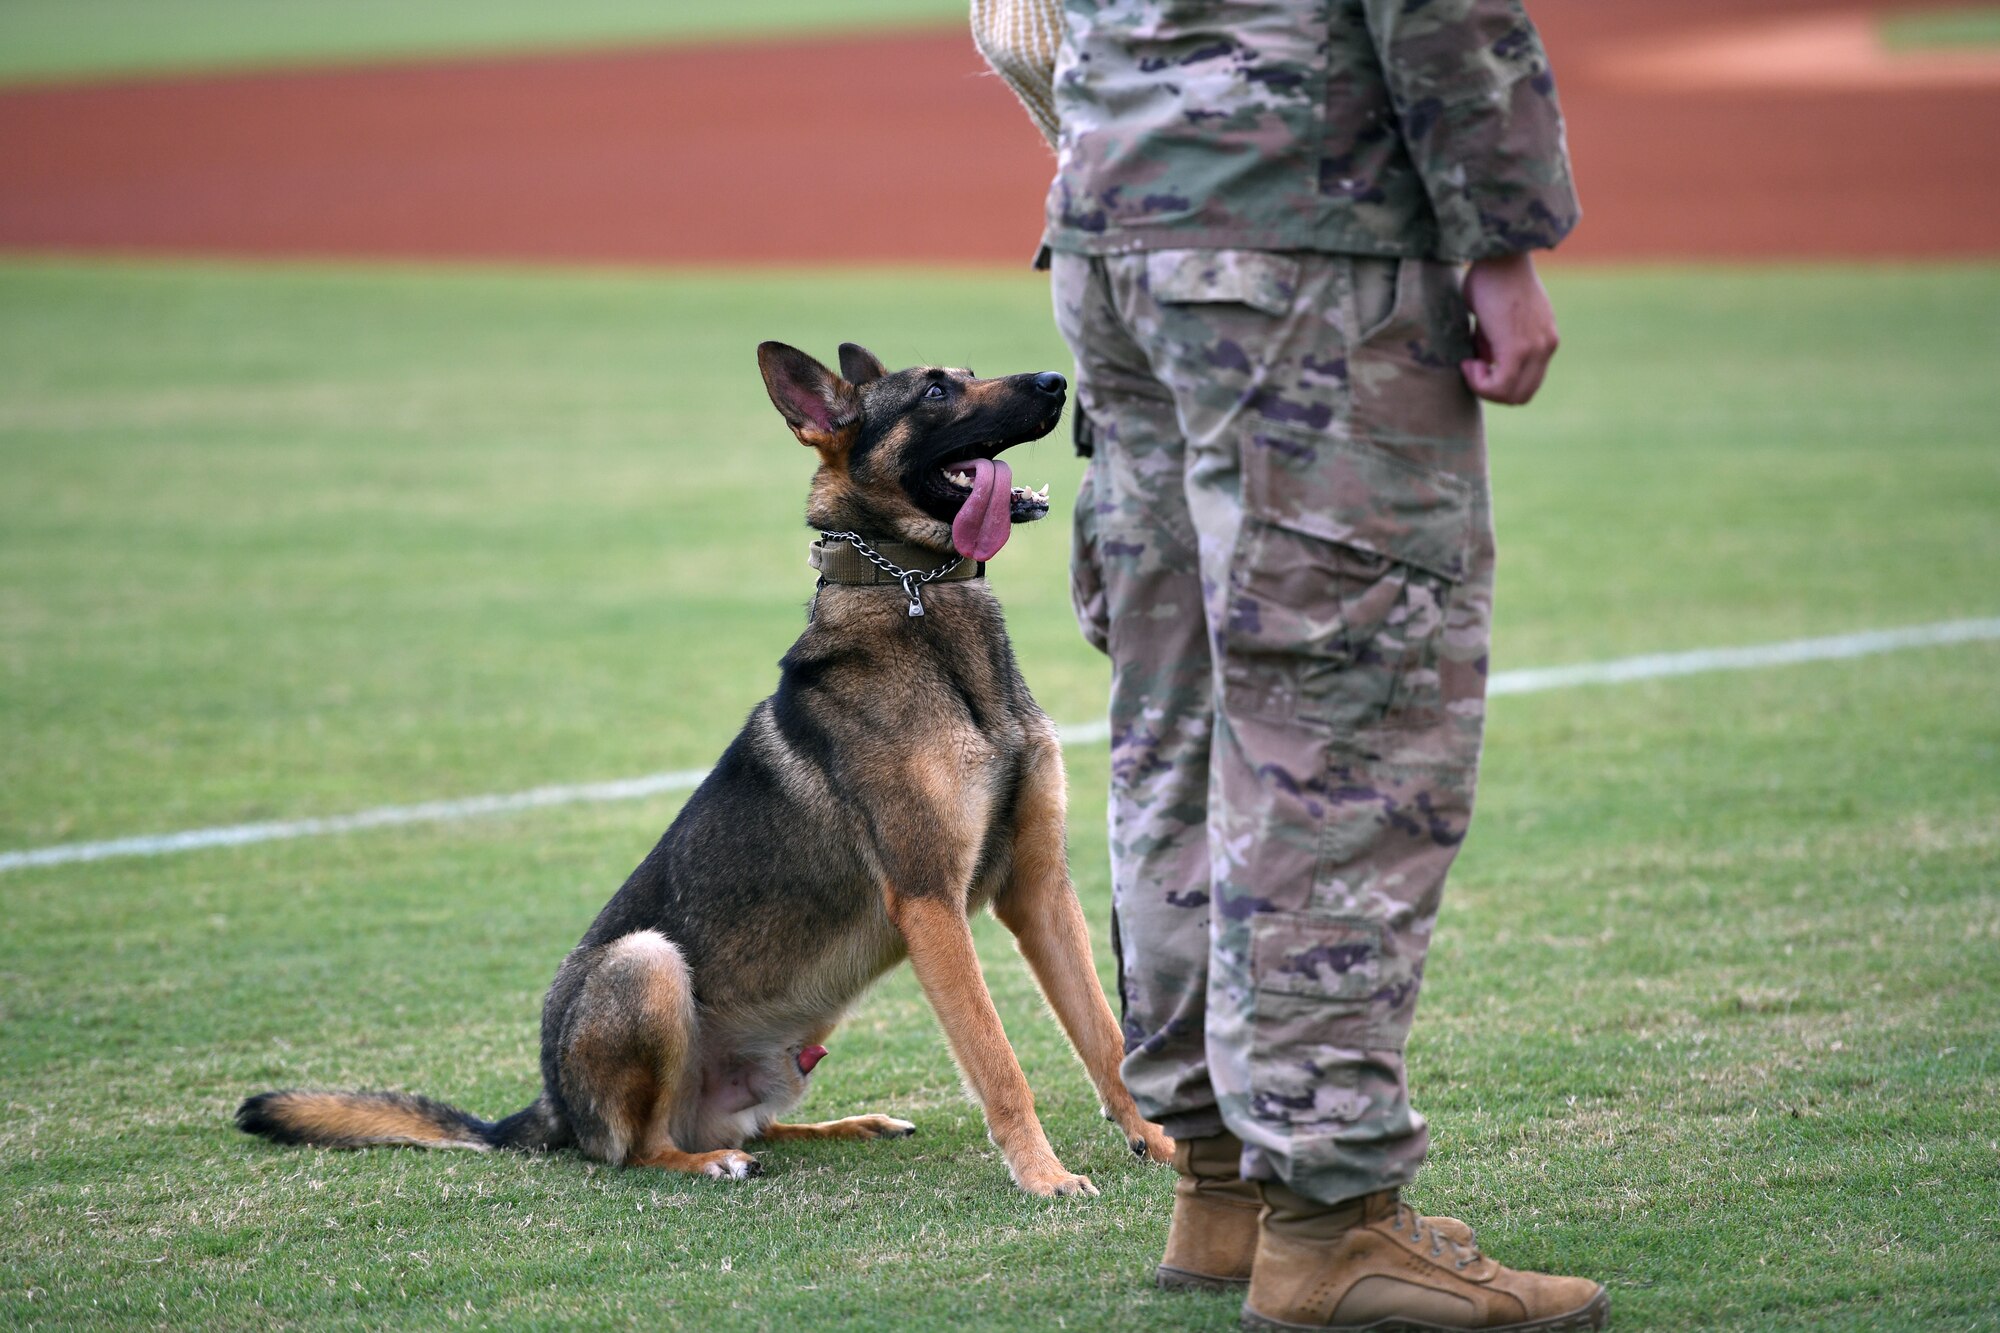 U.S. Air Force Staff Sgt. Cody Garton, 81st Security Forces Squadron military working dog handler, and Rico, 81st SFS military working dog, participate in a demonstration at the MGM Park during a Biloxi Shuckers Minor League Baseball team pre-game festivities in Biloxi, Mississippi, Aug. 1, 2021. The "Bark in the Park" themed baseball game invited fans to attend the game with their dogs. (U.S. Air Force photo by Kemberly Groue)